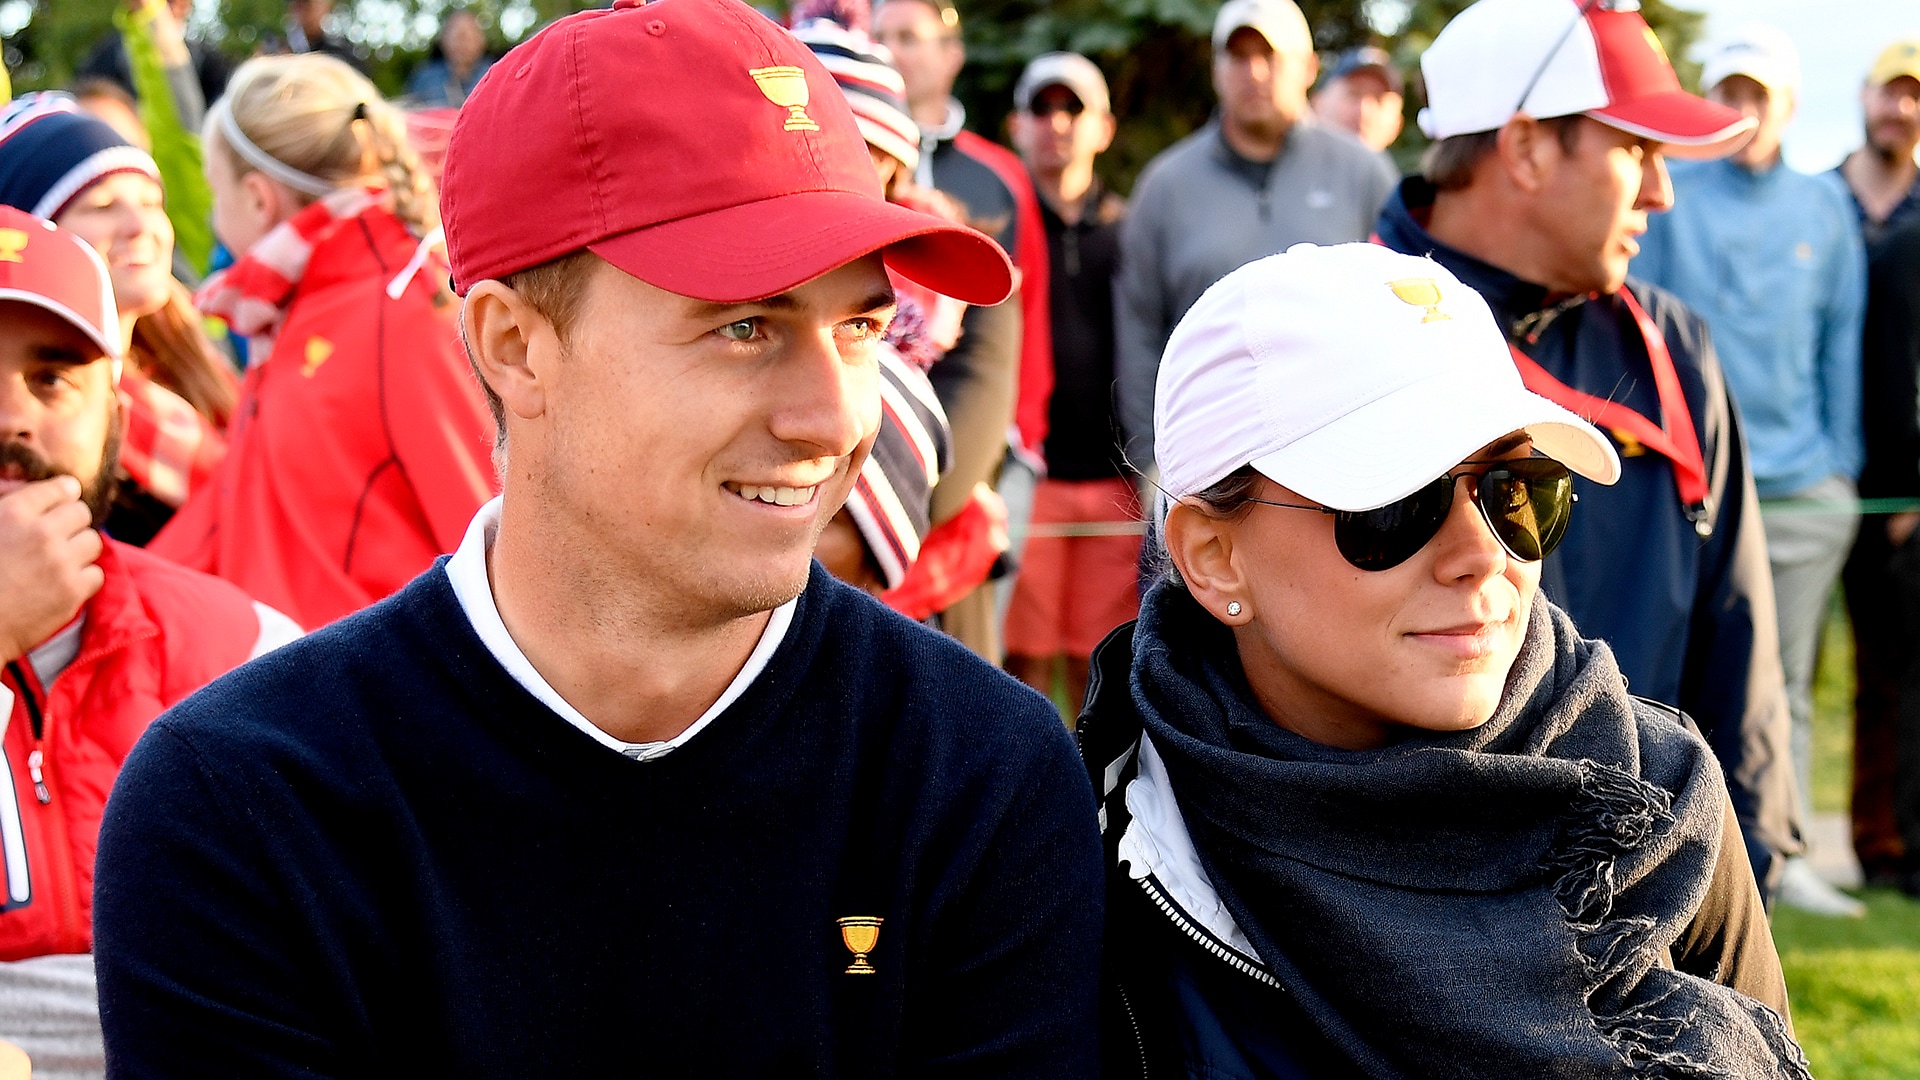 Jordan Spieth says he, wife Annie are expecting first child this fall